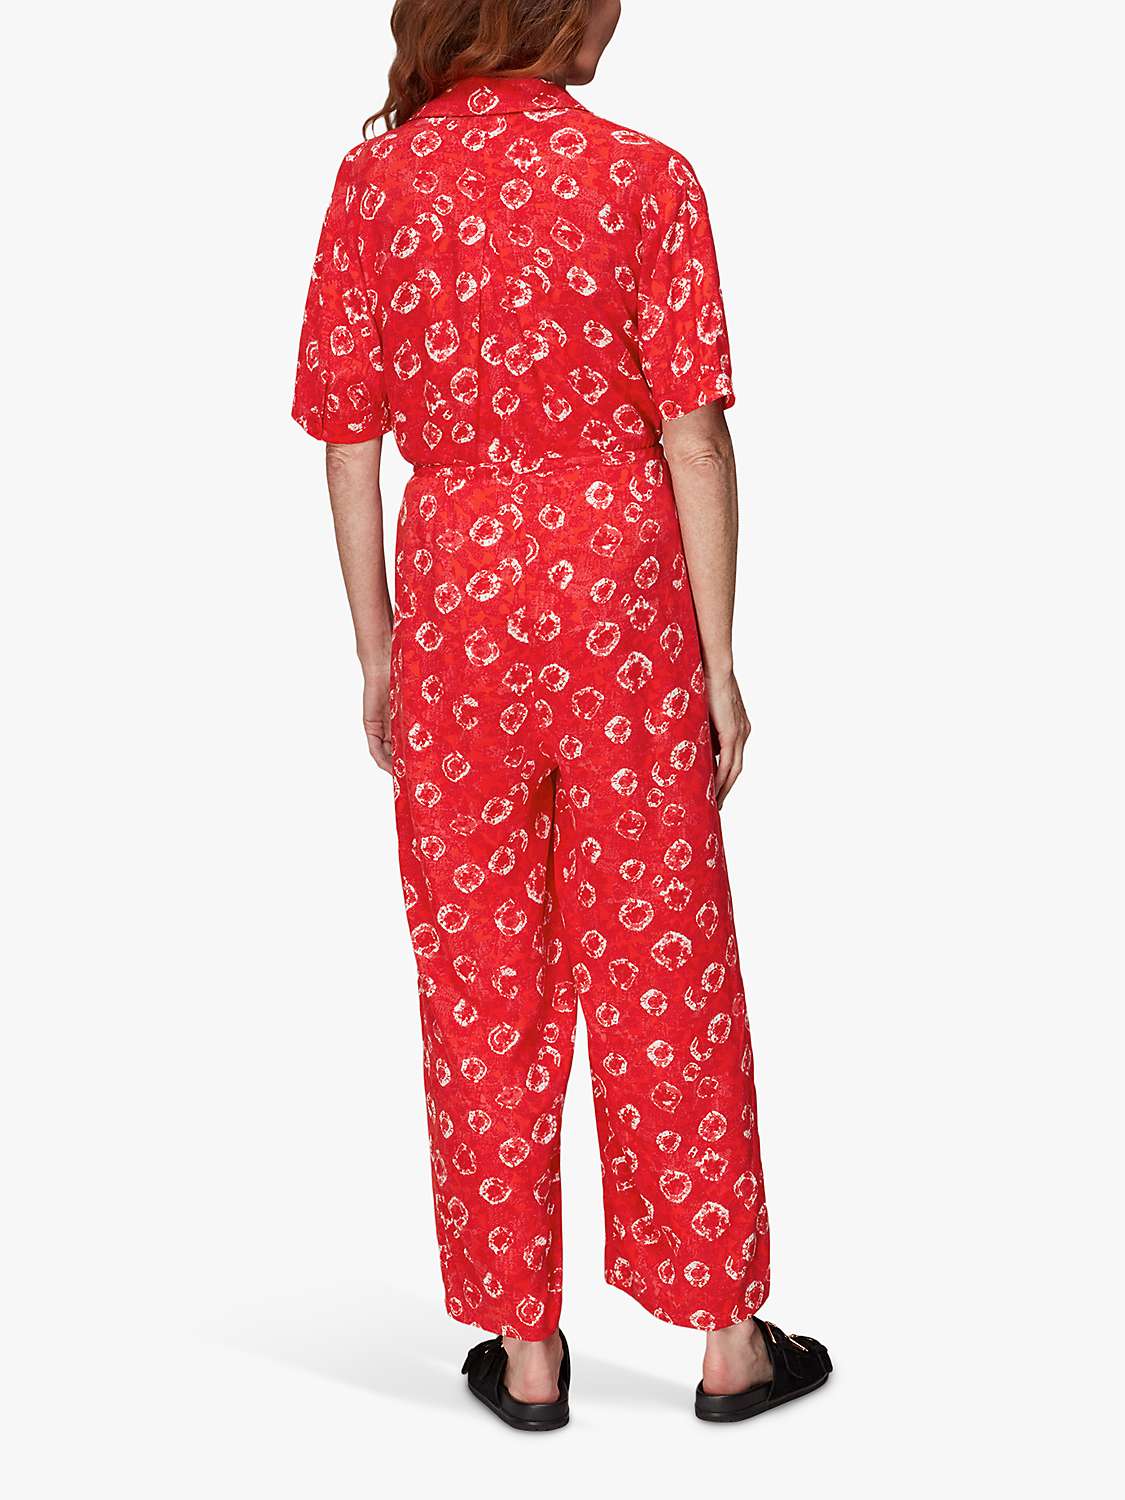 Buy Whistles Jenny Tie Dye Floral Jumpsuit, Red/Multi Online at johnlewis.com